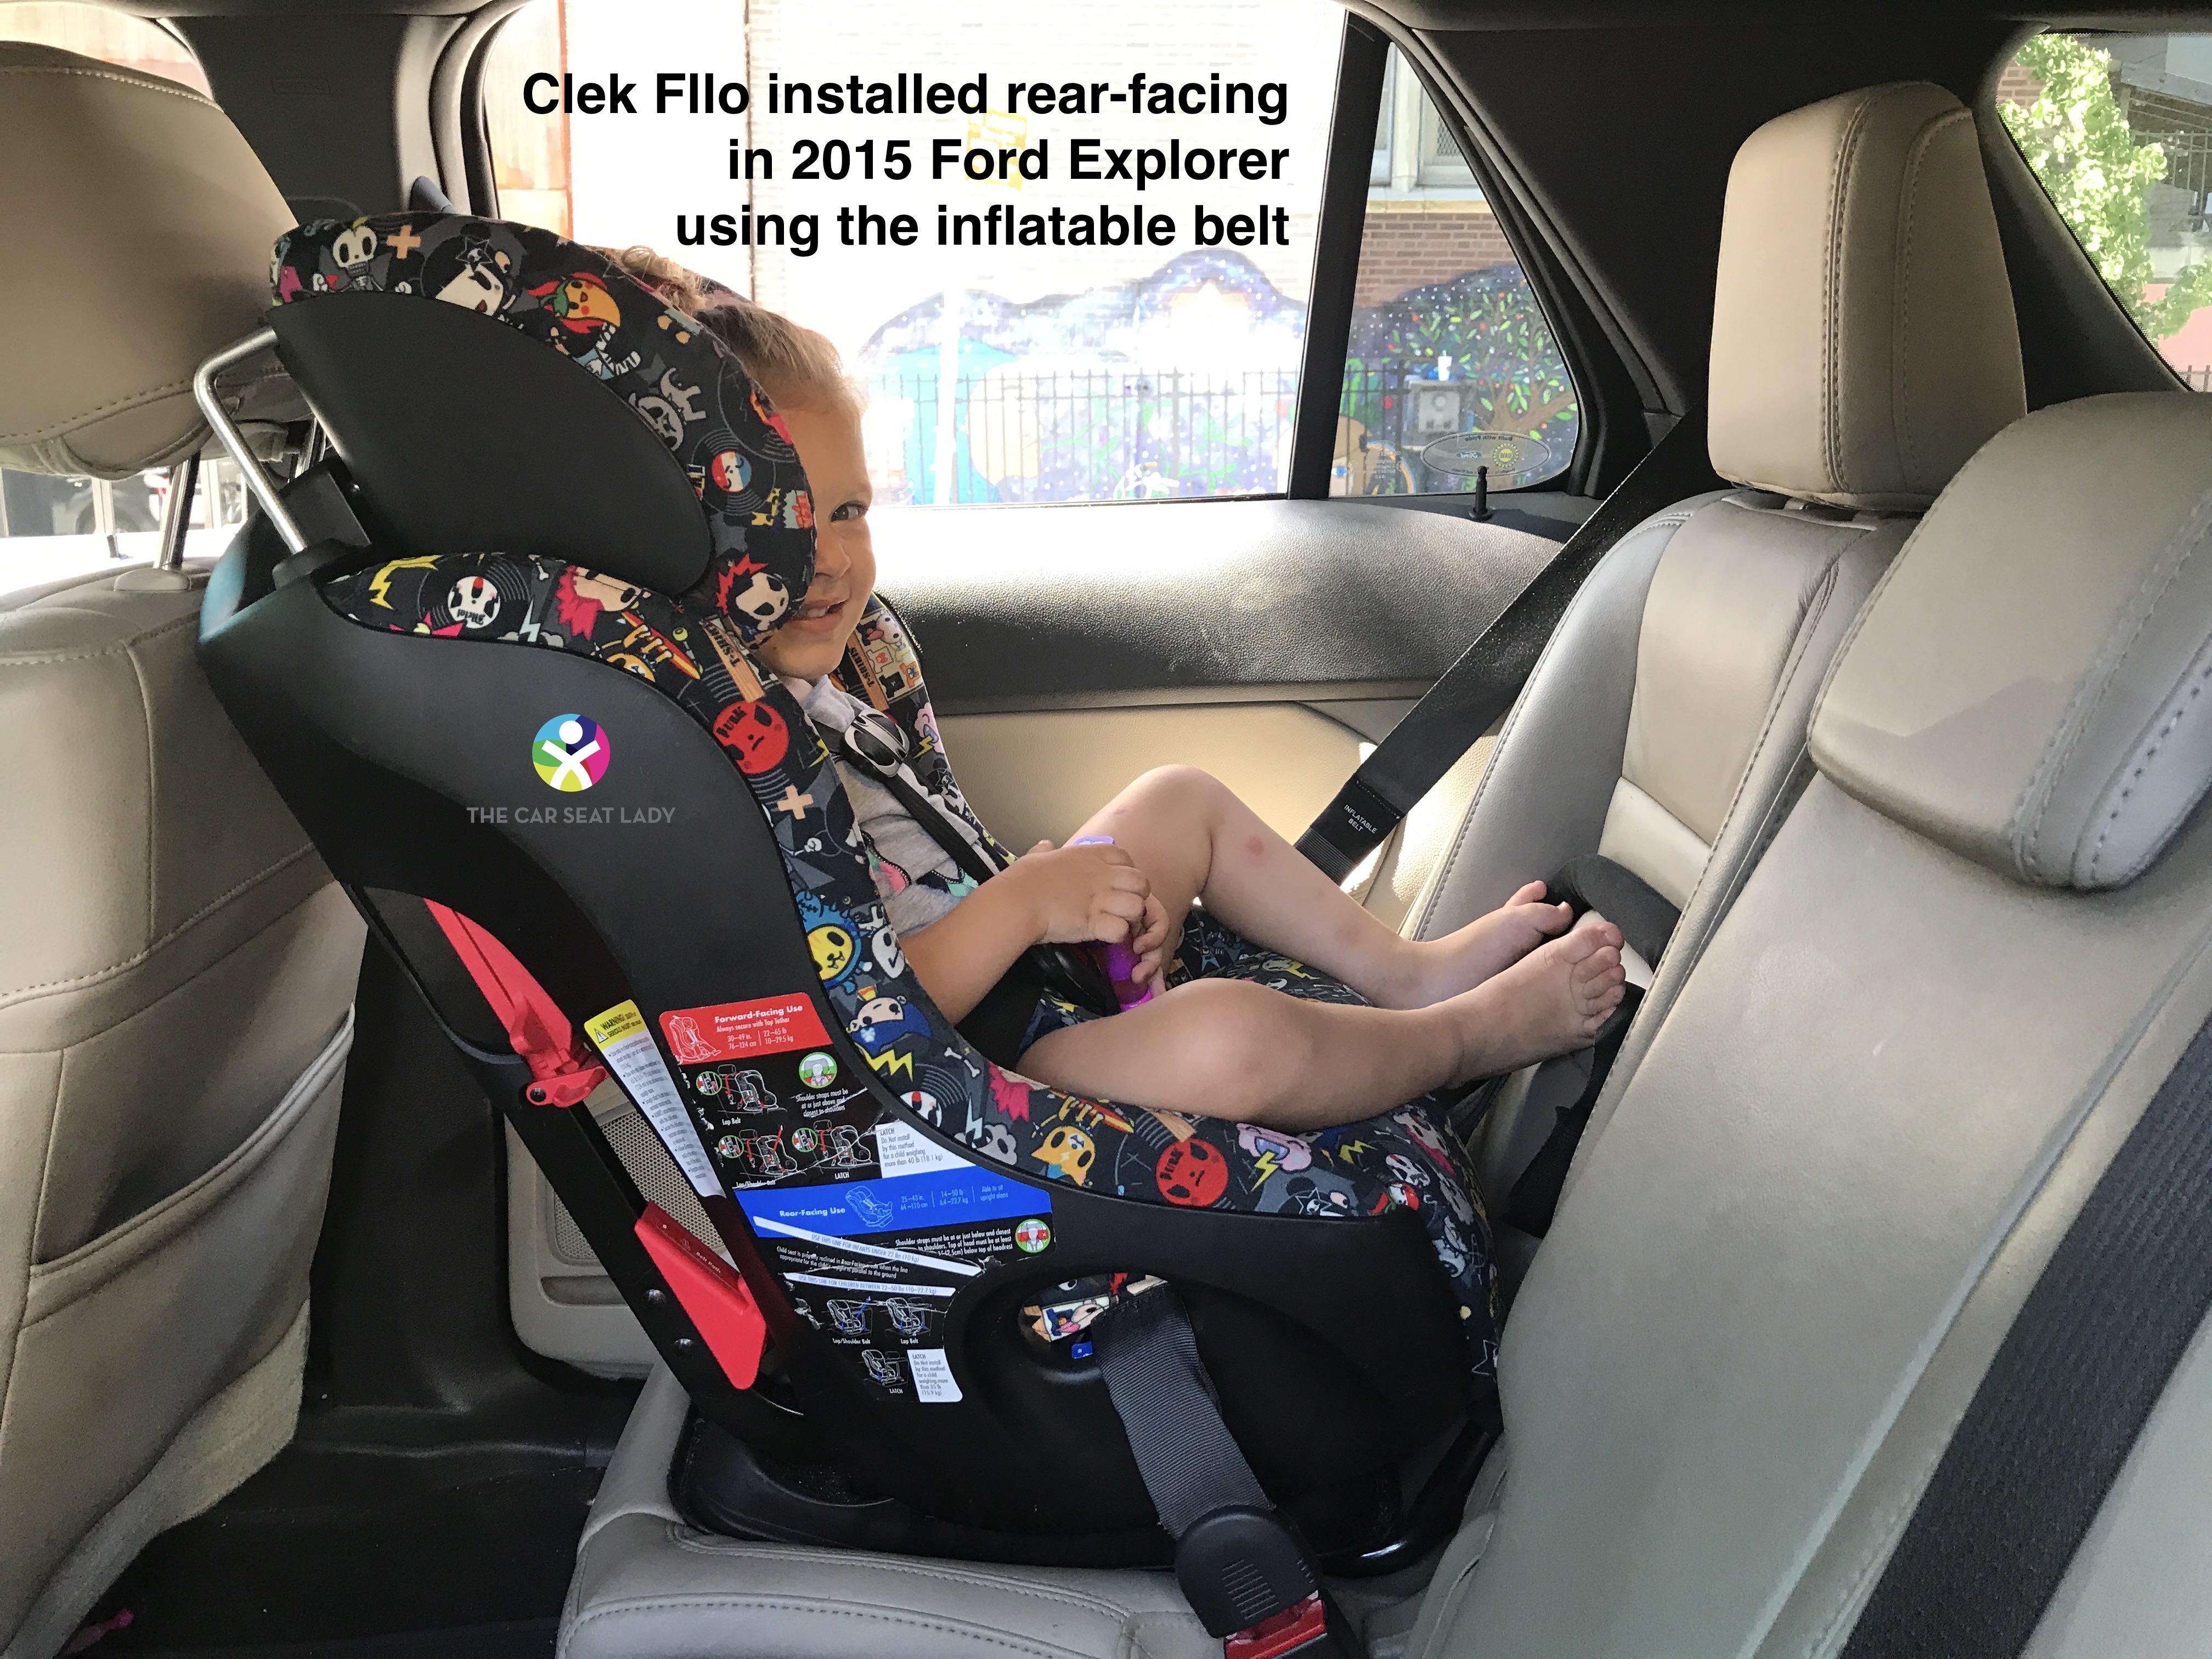 https://thecarseatlady.com/wp-content/uploads/2017/07/Clek-Fllo-RF-insatlled-with-inflatable-belt-with-3.5yo-RF.jpg